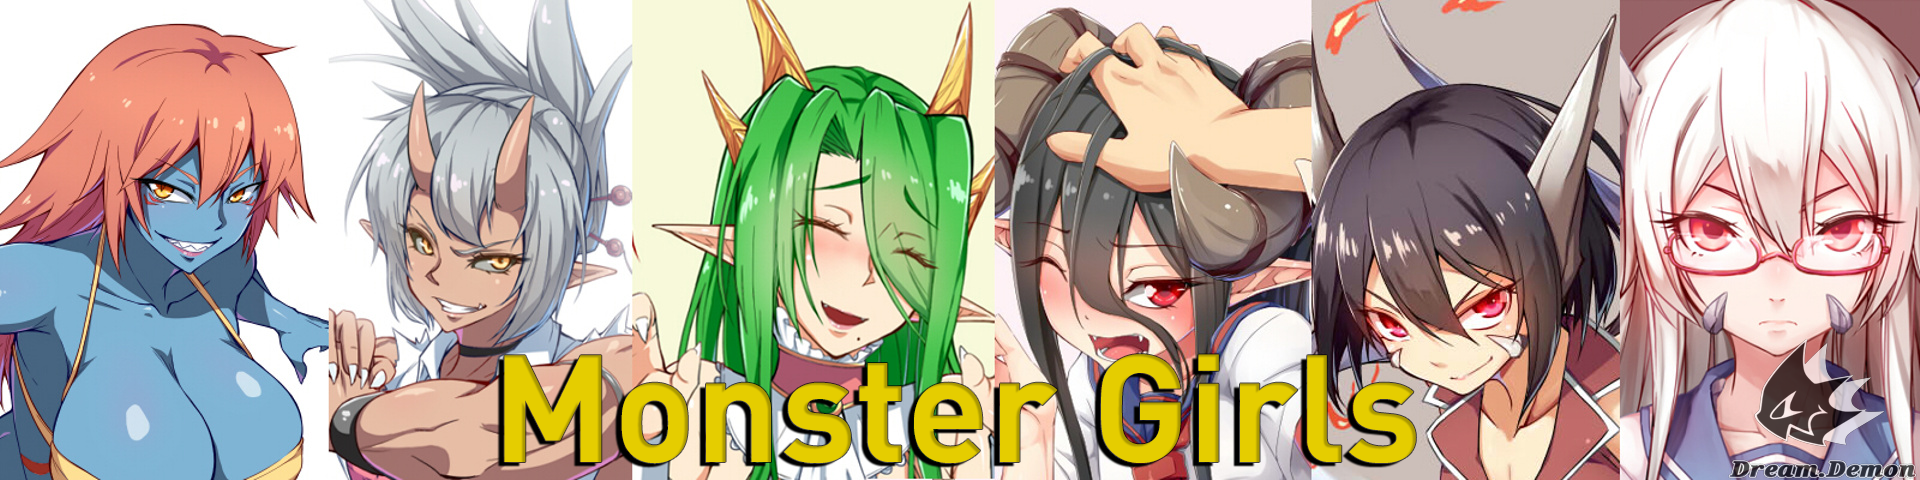 Monster Girl Project 2019-11-23 Mei by dreamdemon Porn Game